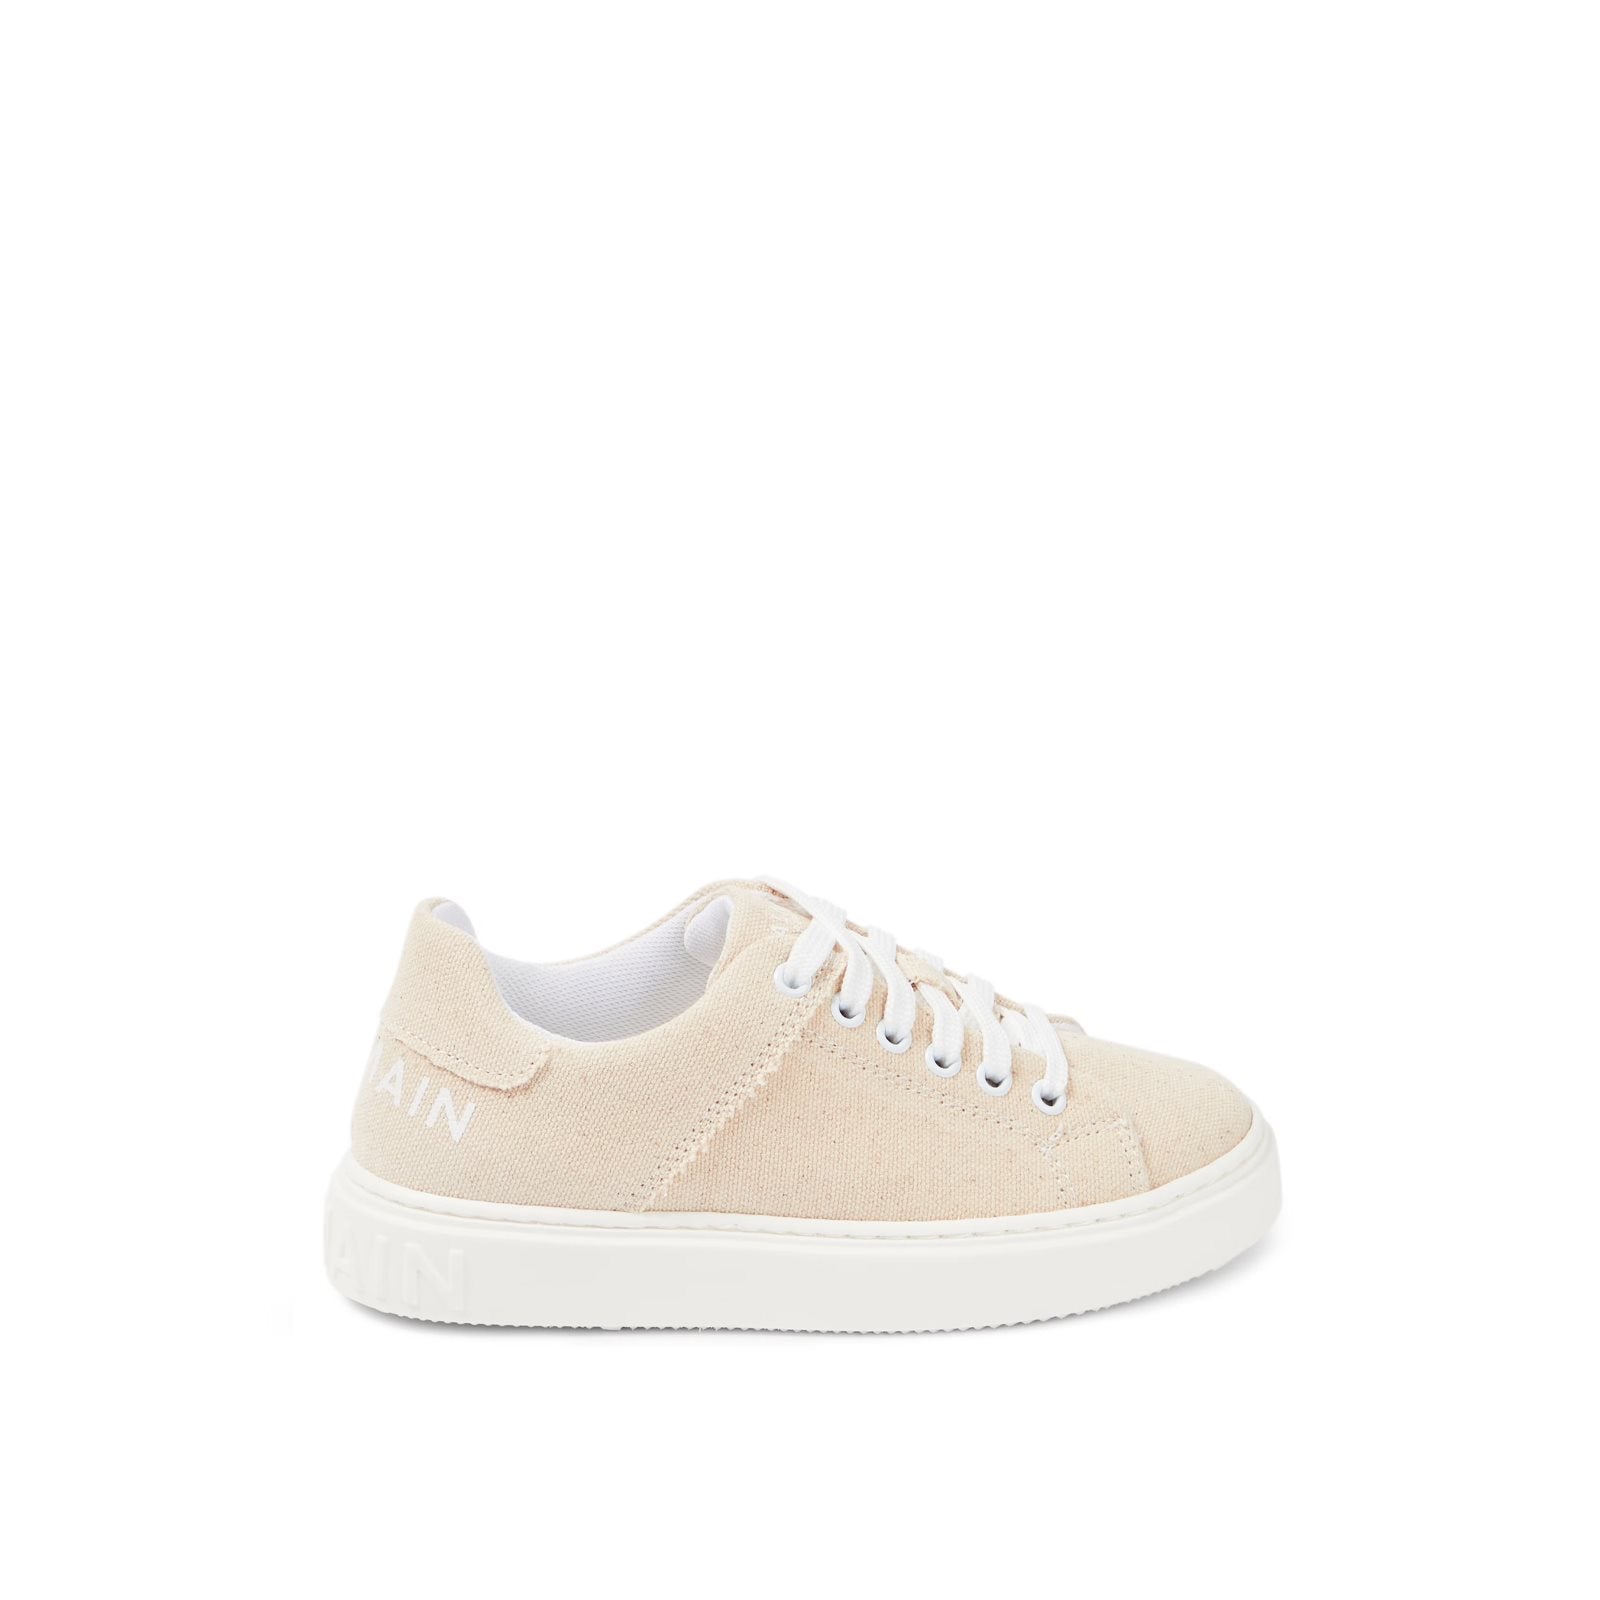 B-Court canvas sneakers